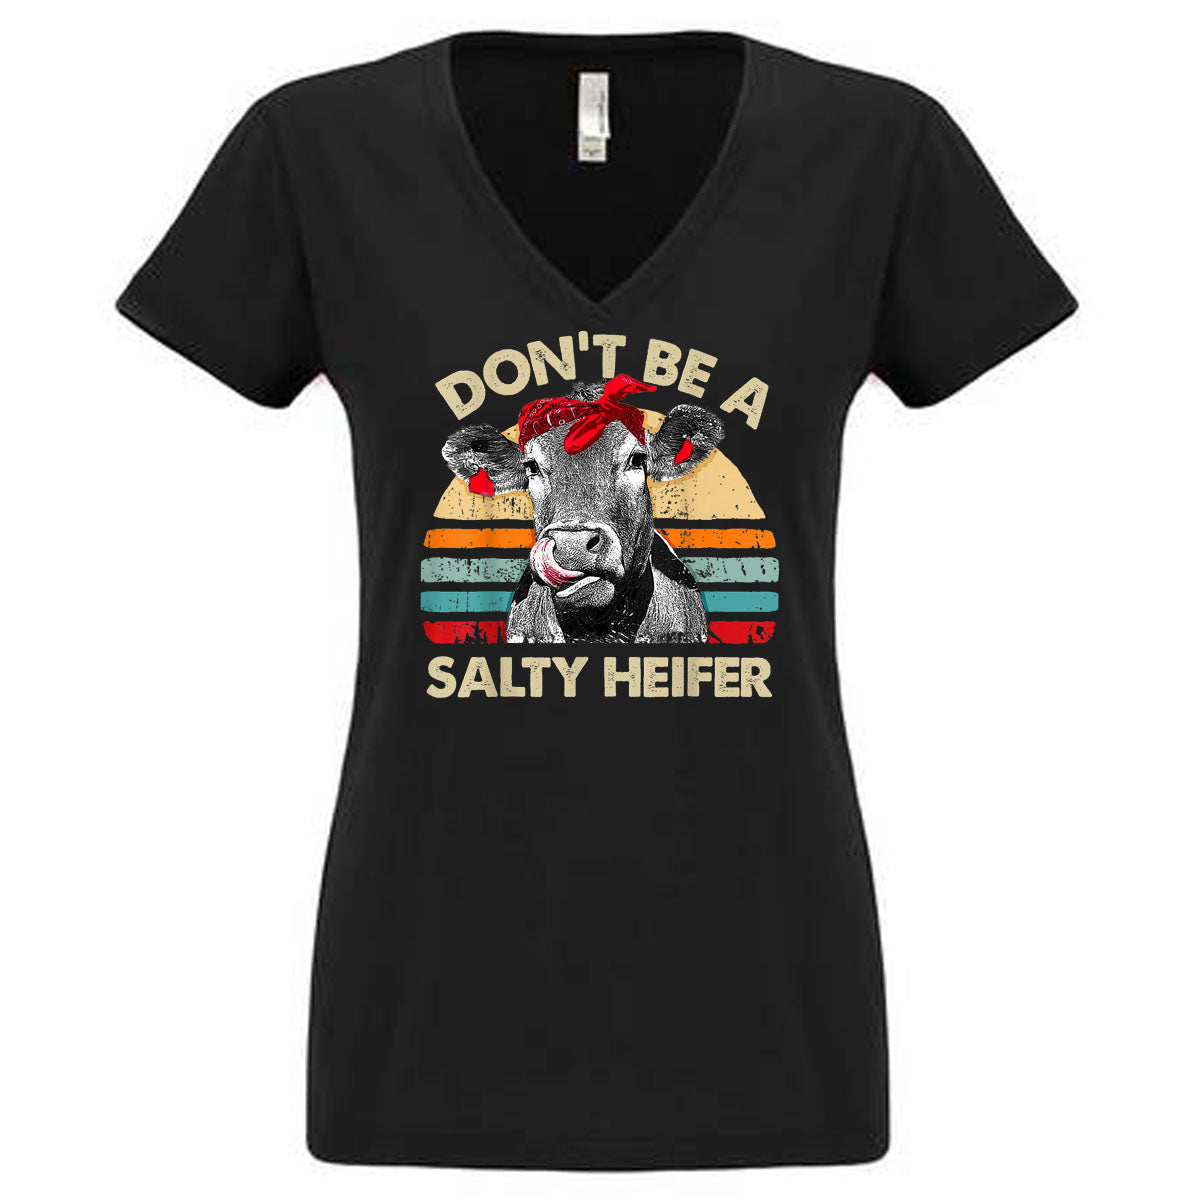 Don't Be A Salty Heifer - Black Tee - Southern Grace Creations